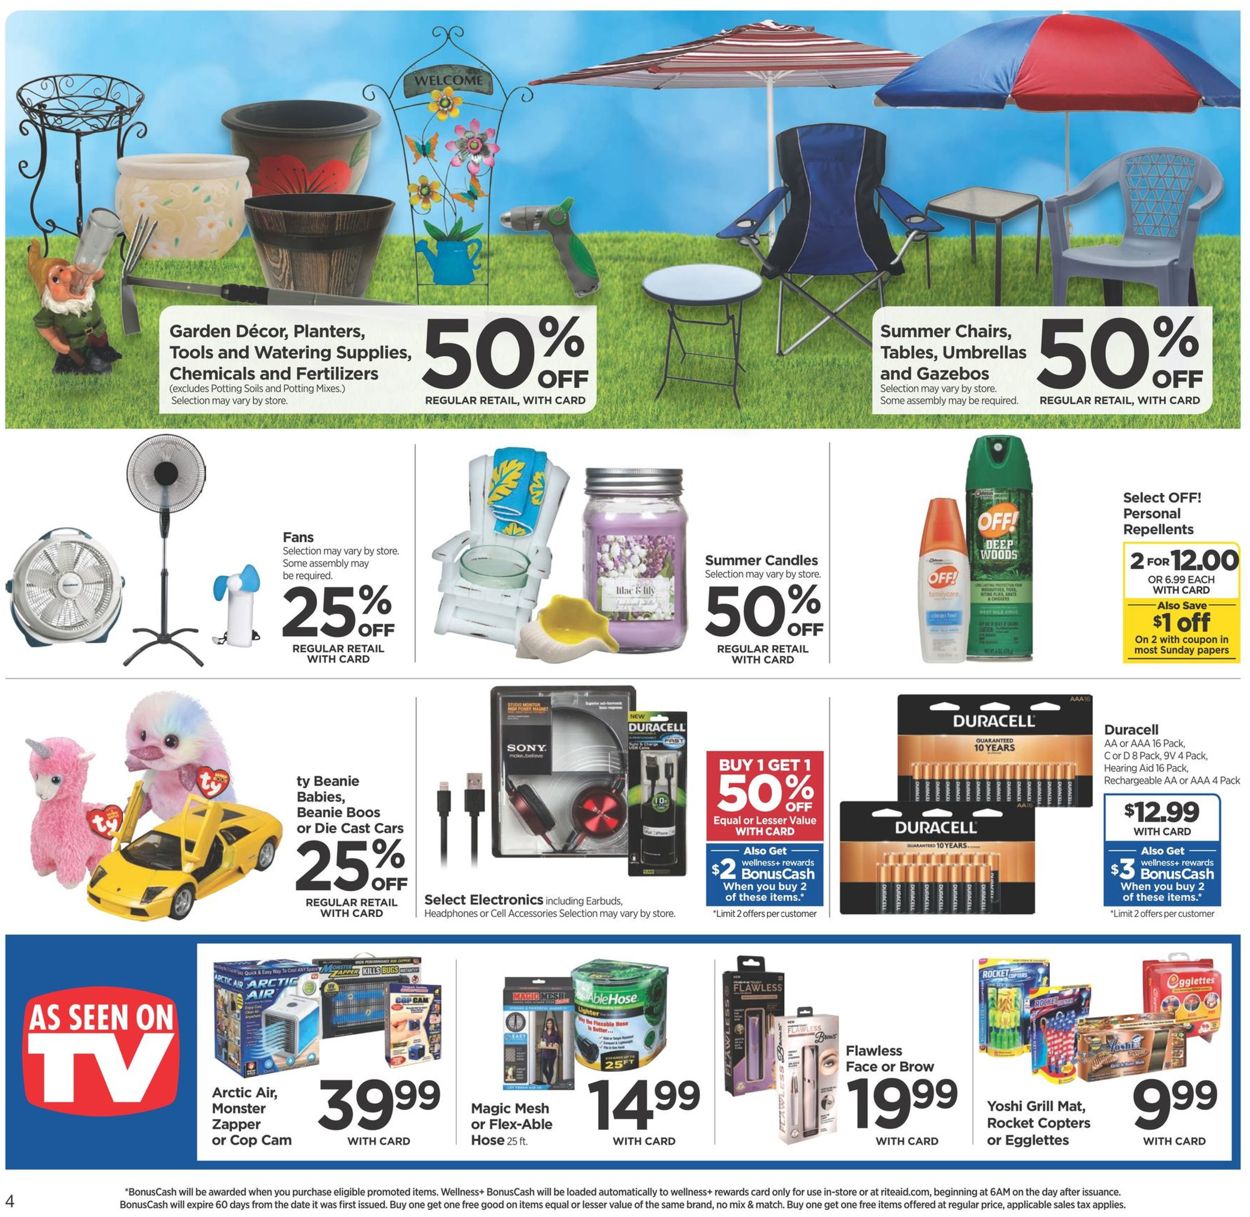 Catalogue Rite Aid from 05/19/2019